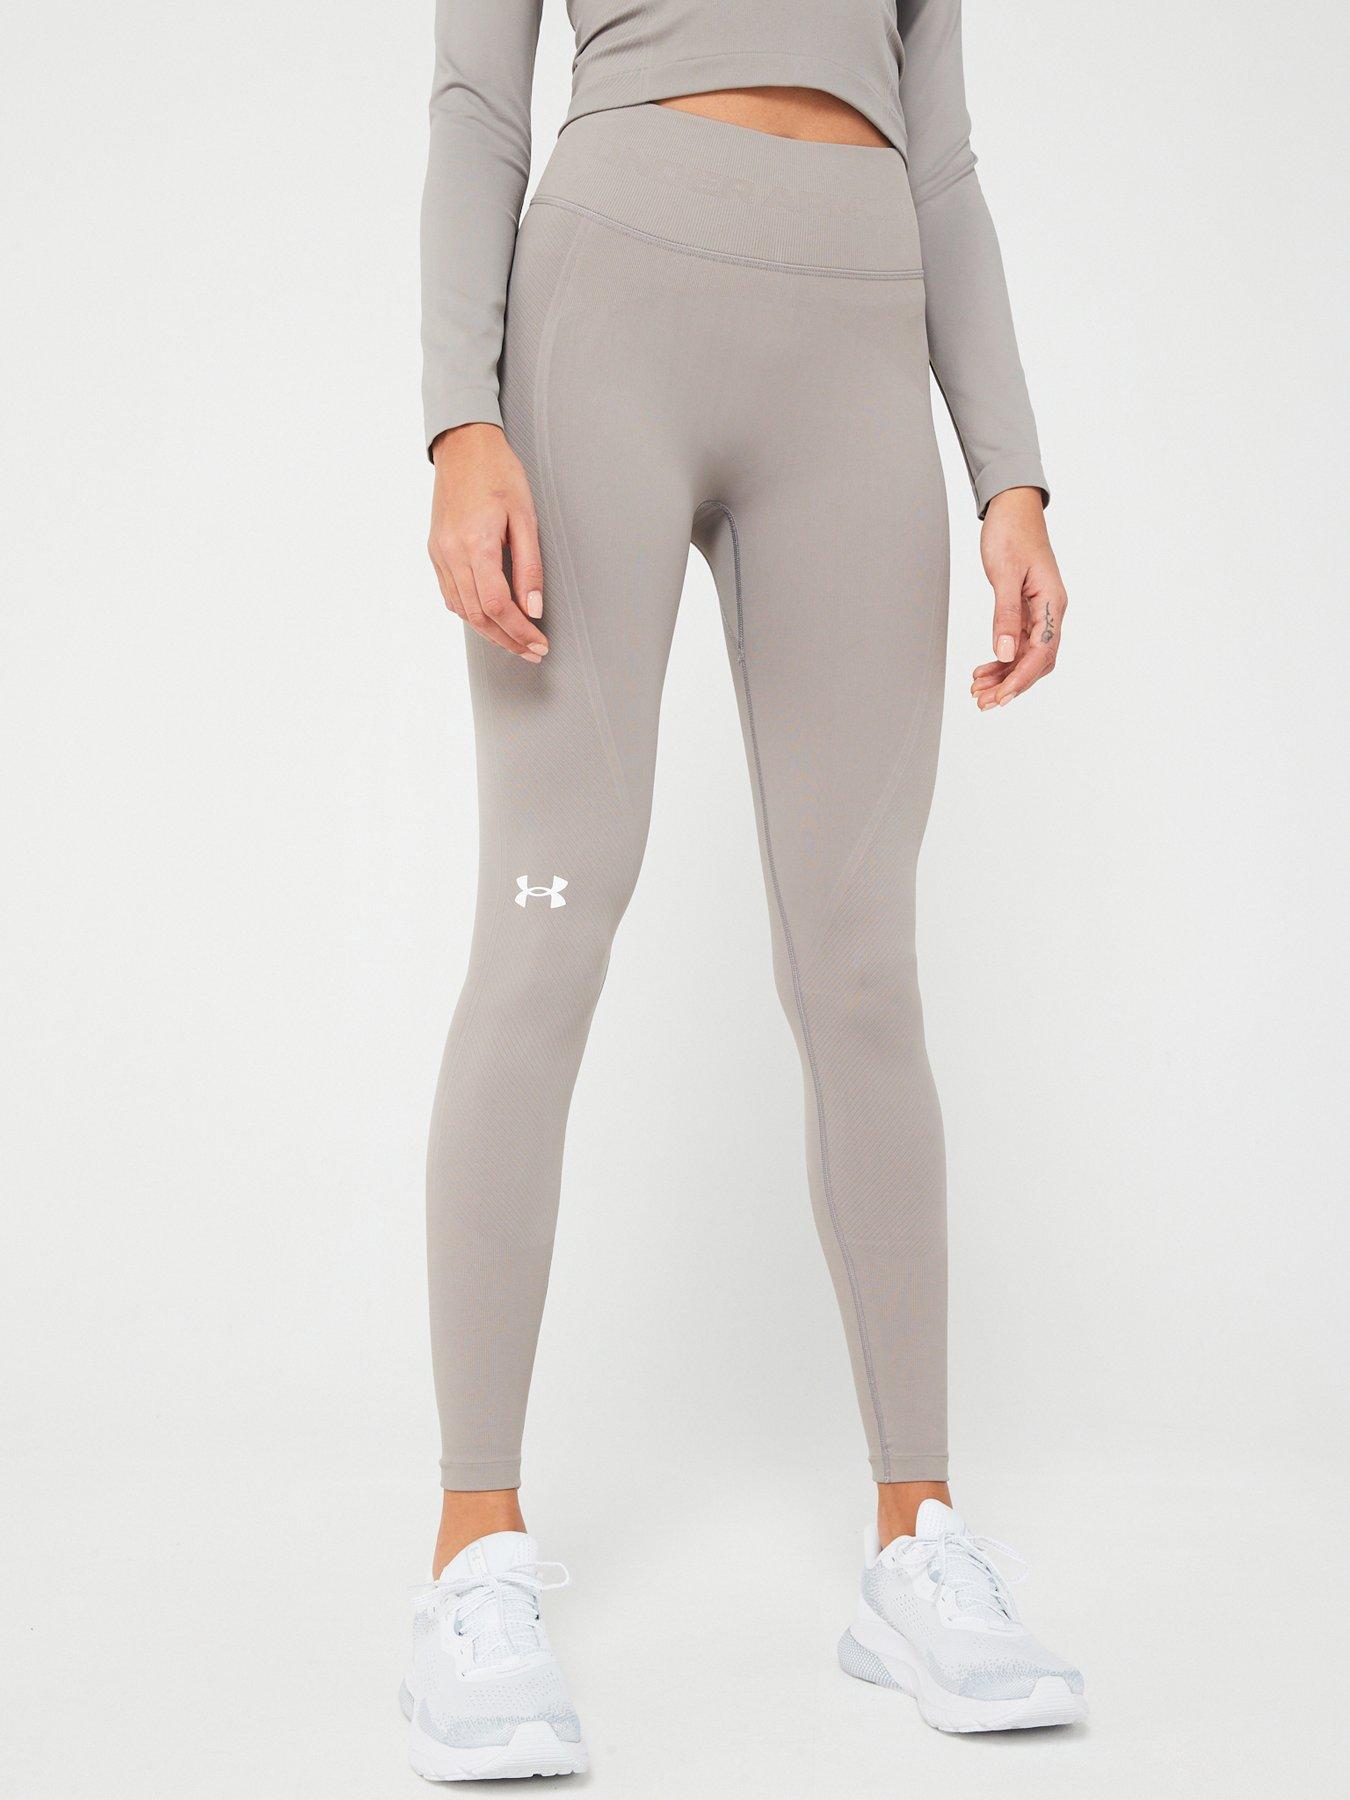 Under armour, Tights & leggings, Womens sports clothing